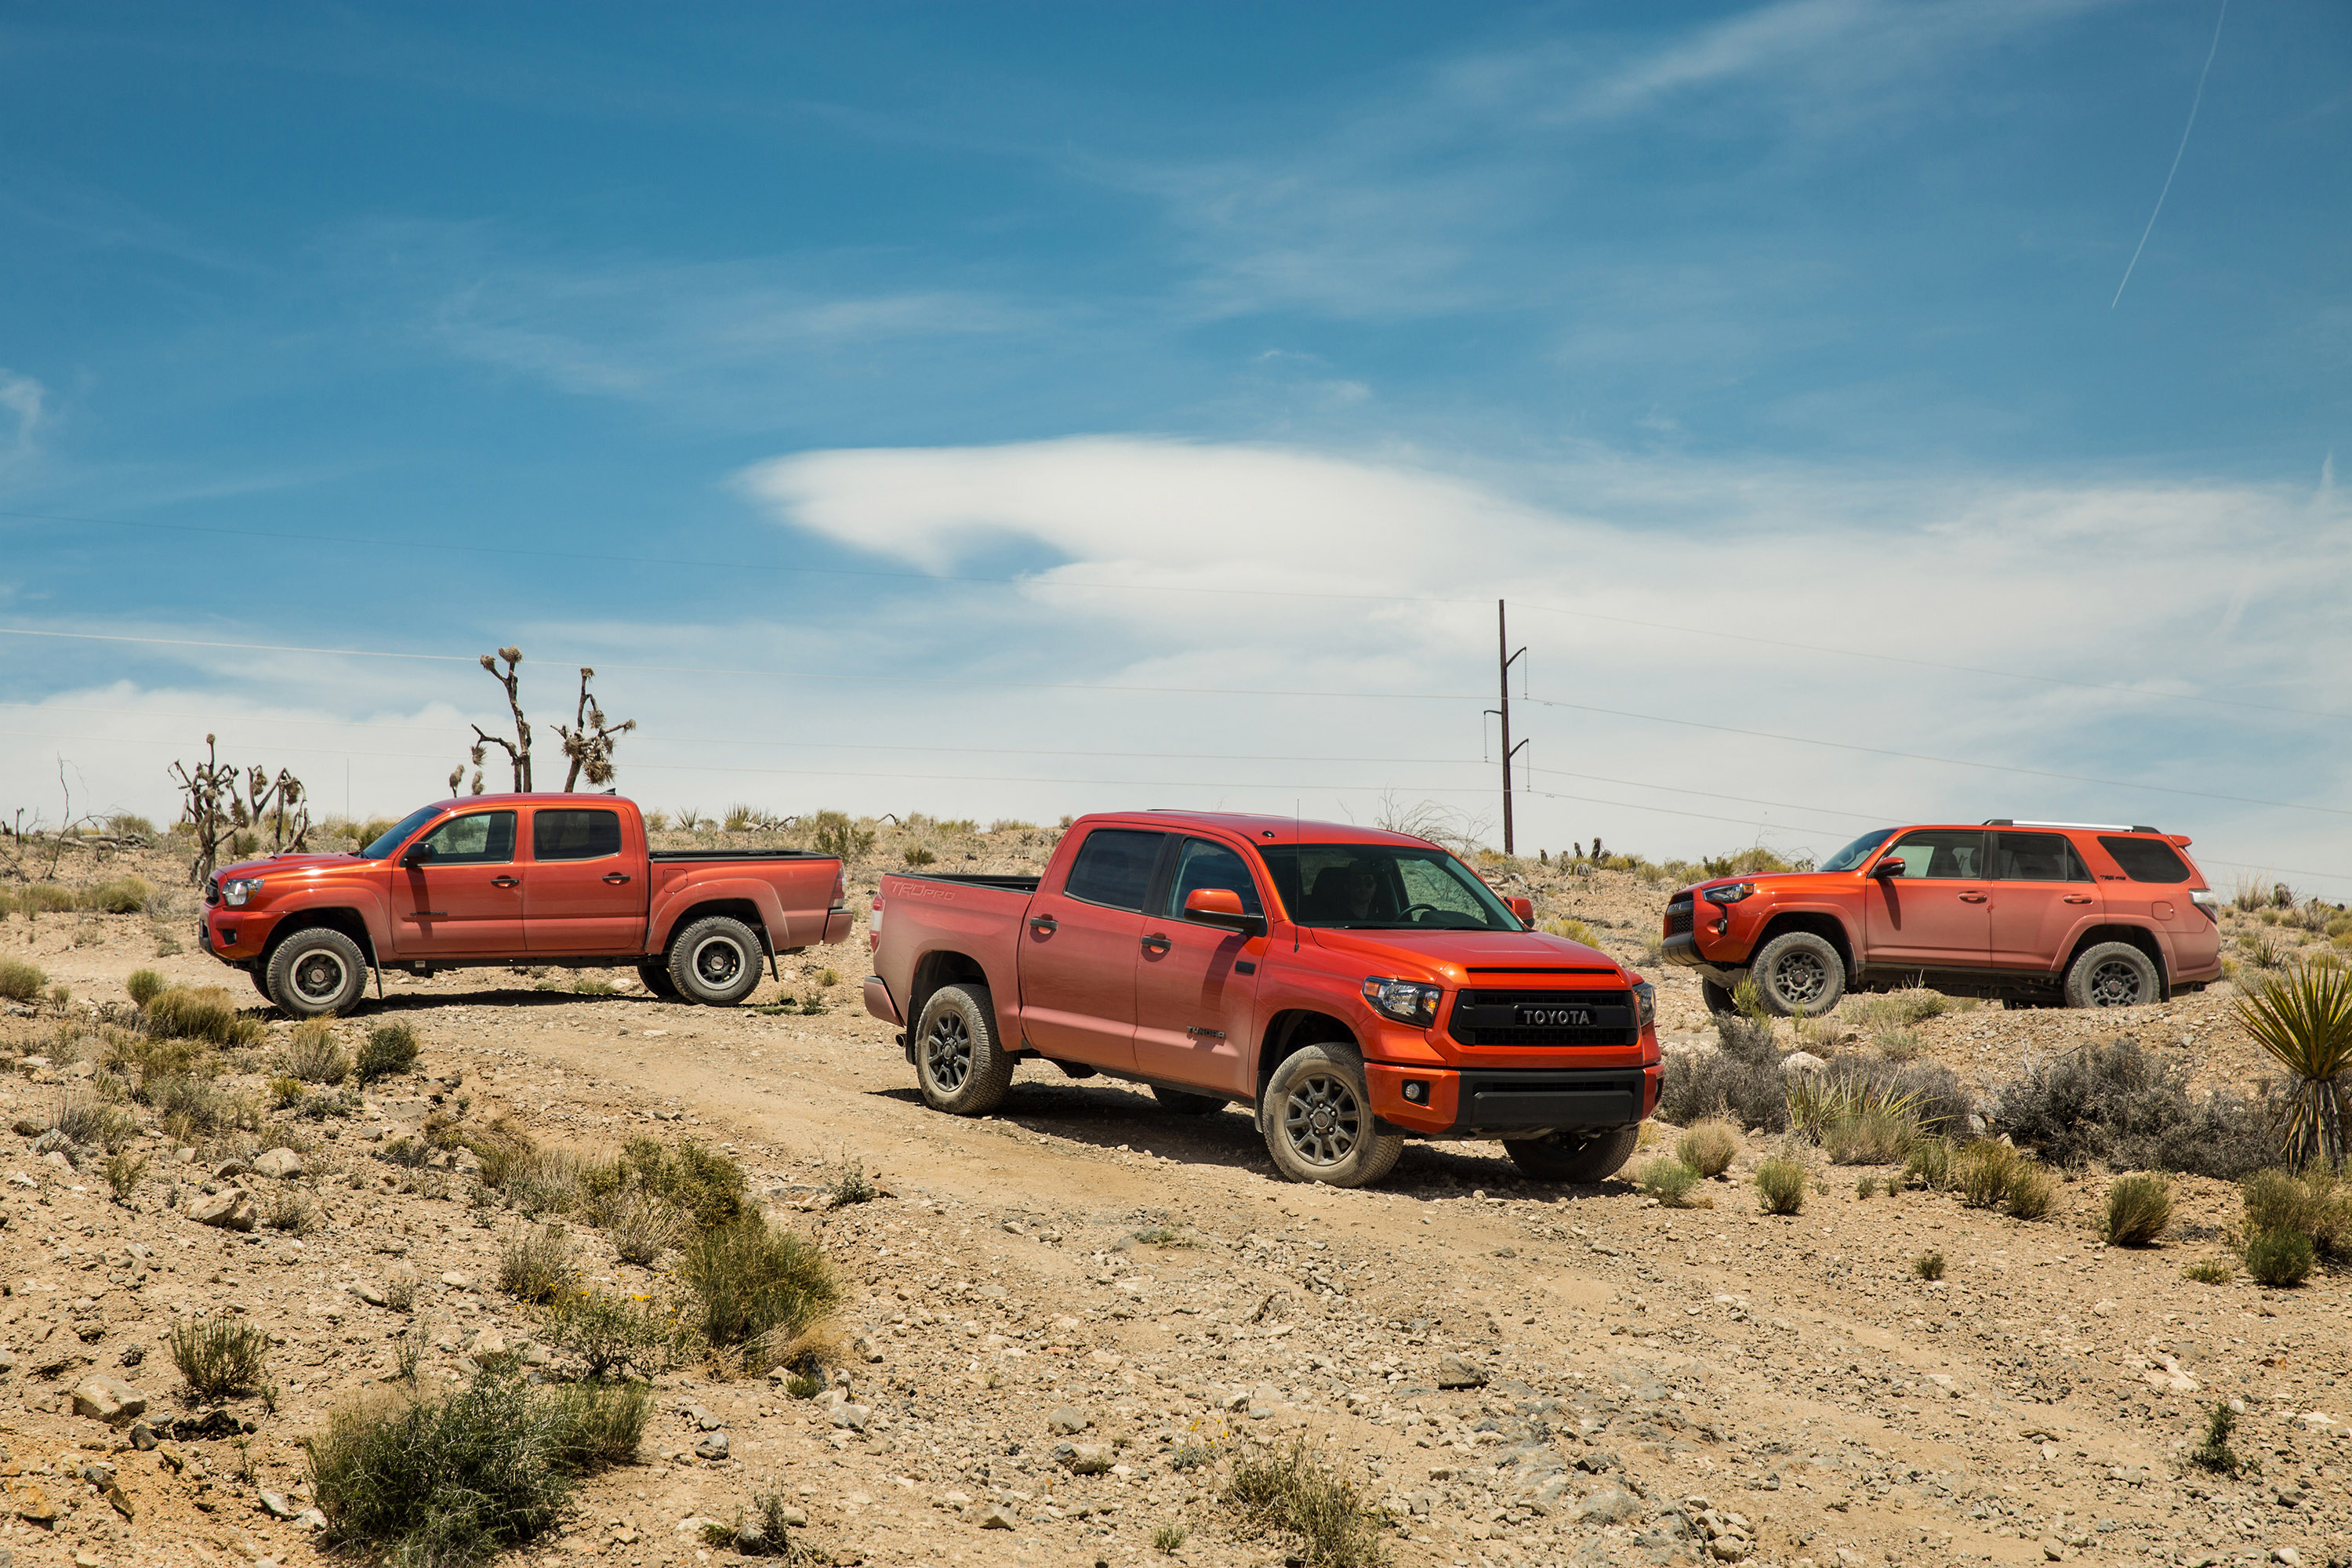 Toyota Publishes Pricing For All New Trd Pro Series Tundra